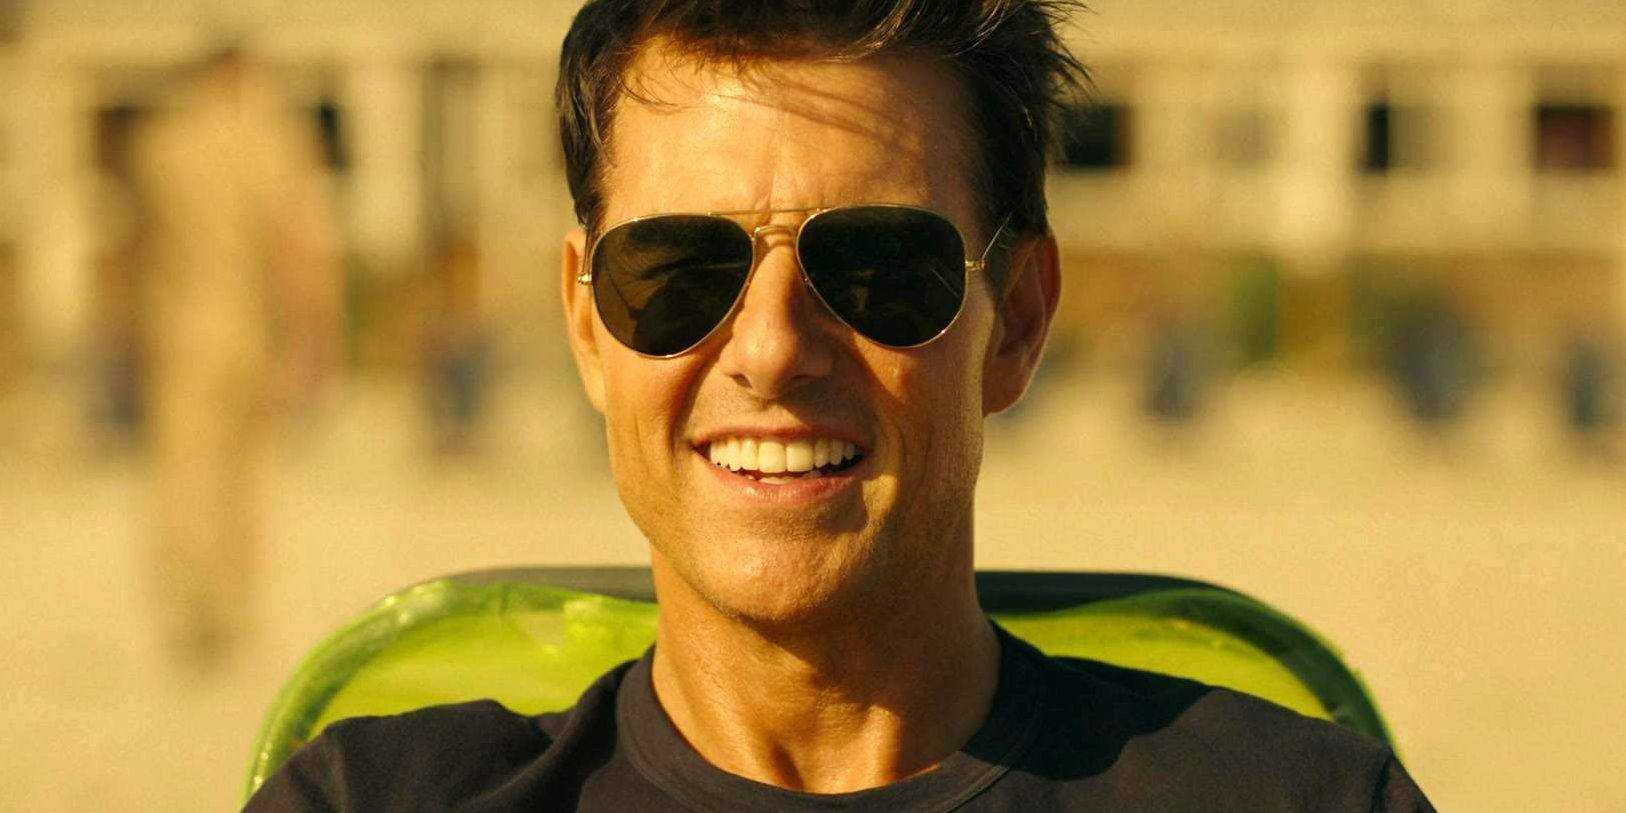 Tom Cruise as Maverick wearing sunglasses and smiling while seated in Top Gun Maverick